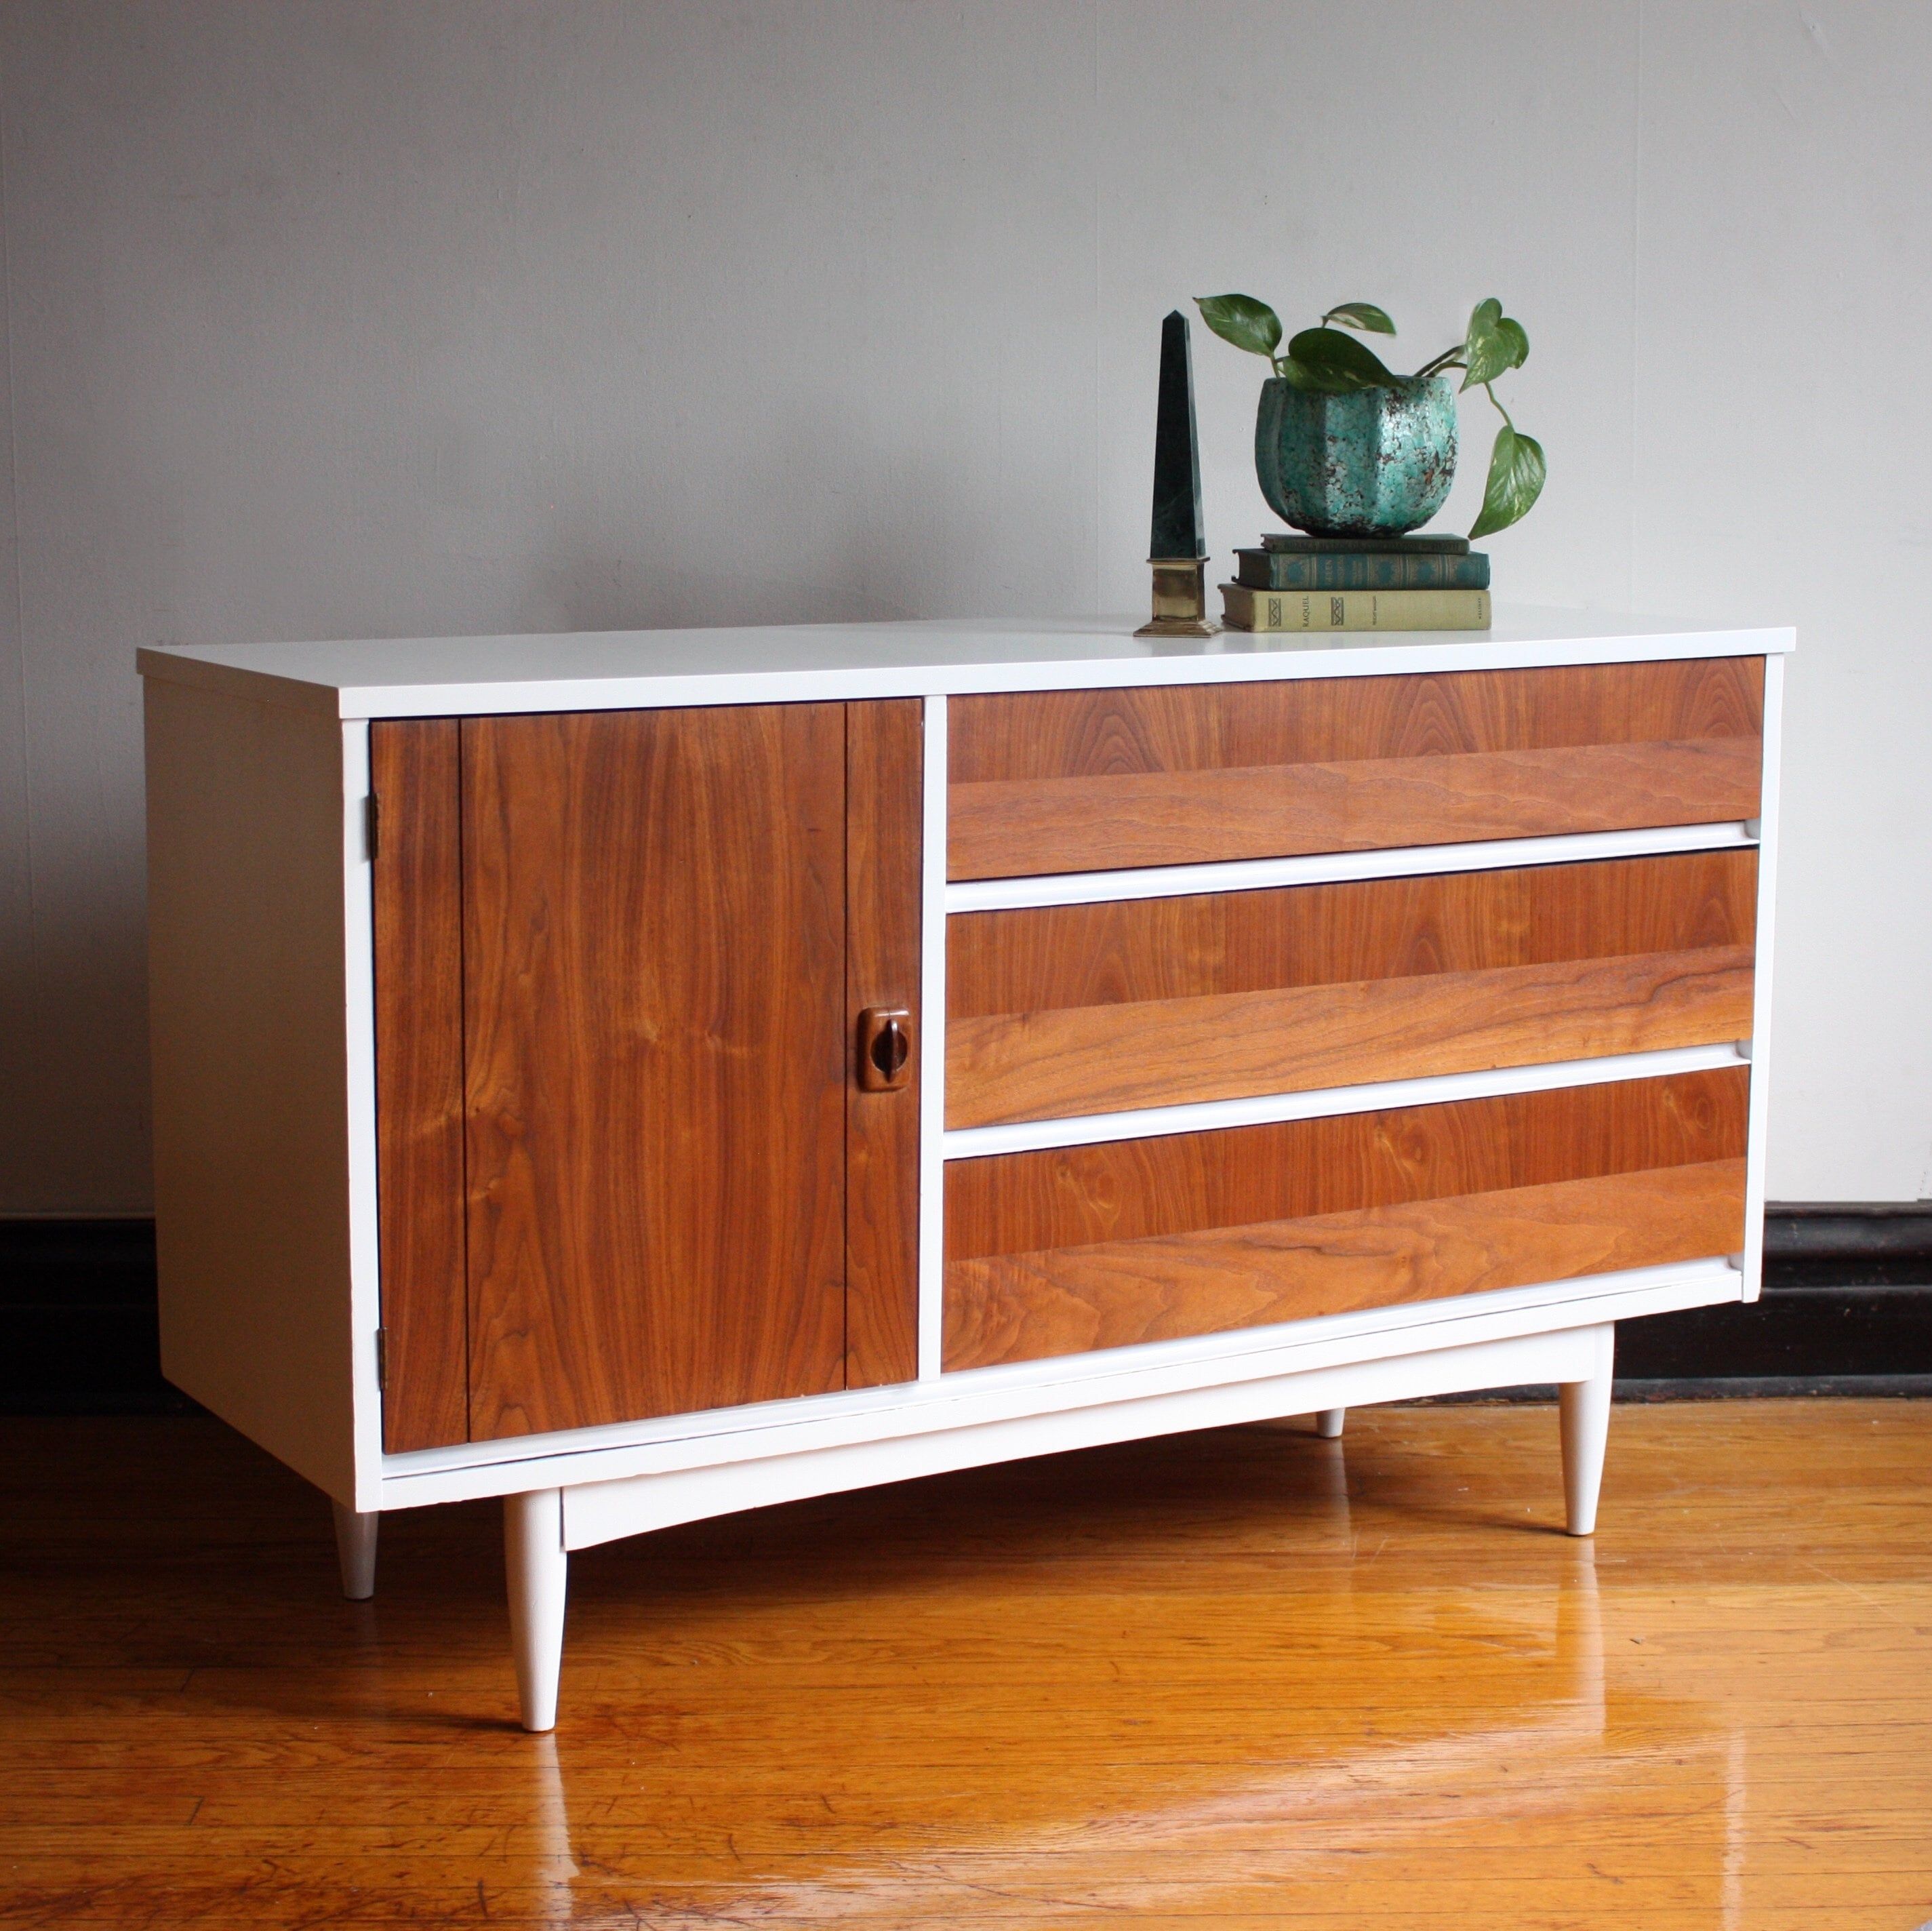 Soldwhite And Wood Mid Century Modern Credenza//mcm Media – Etsy With Most Current Mid Century Modern White Sideboards (View 14 of 15)